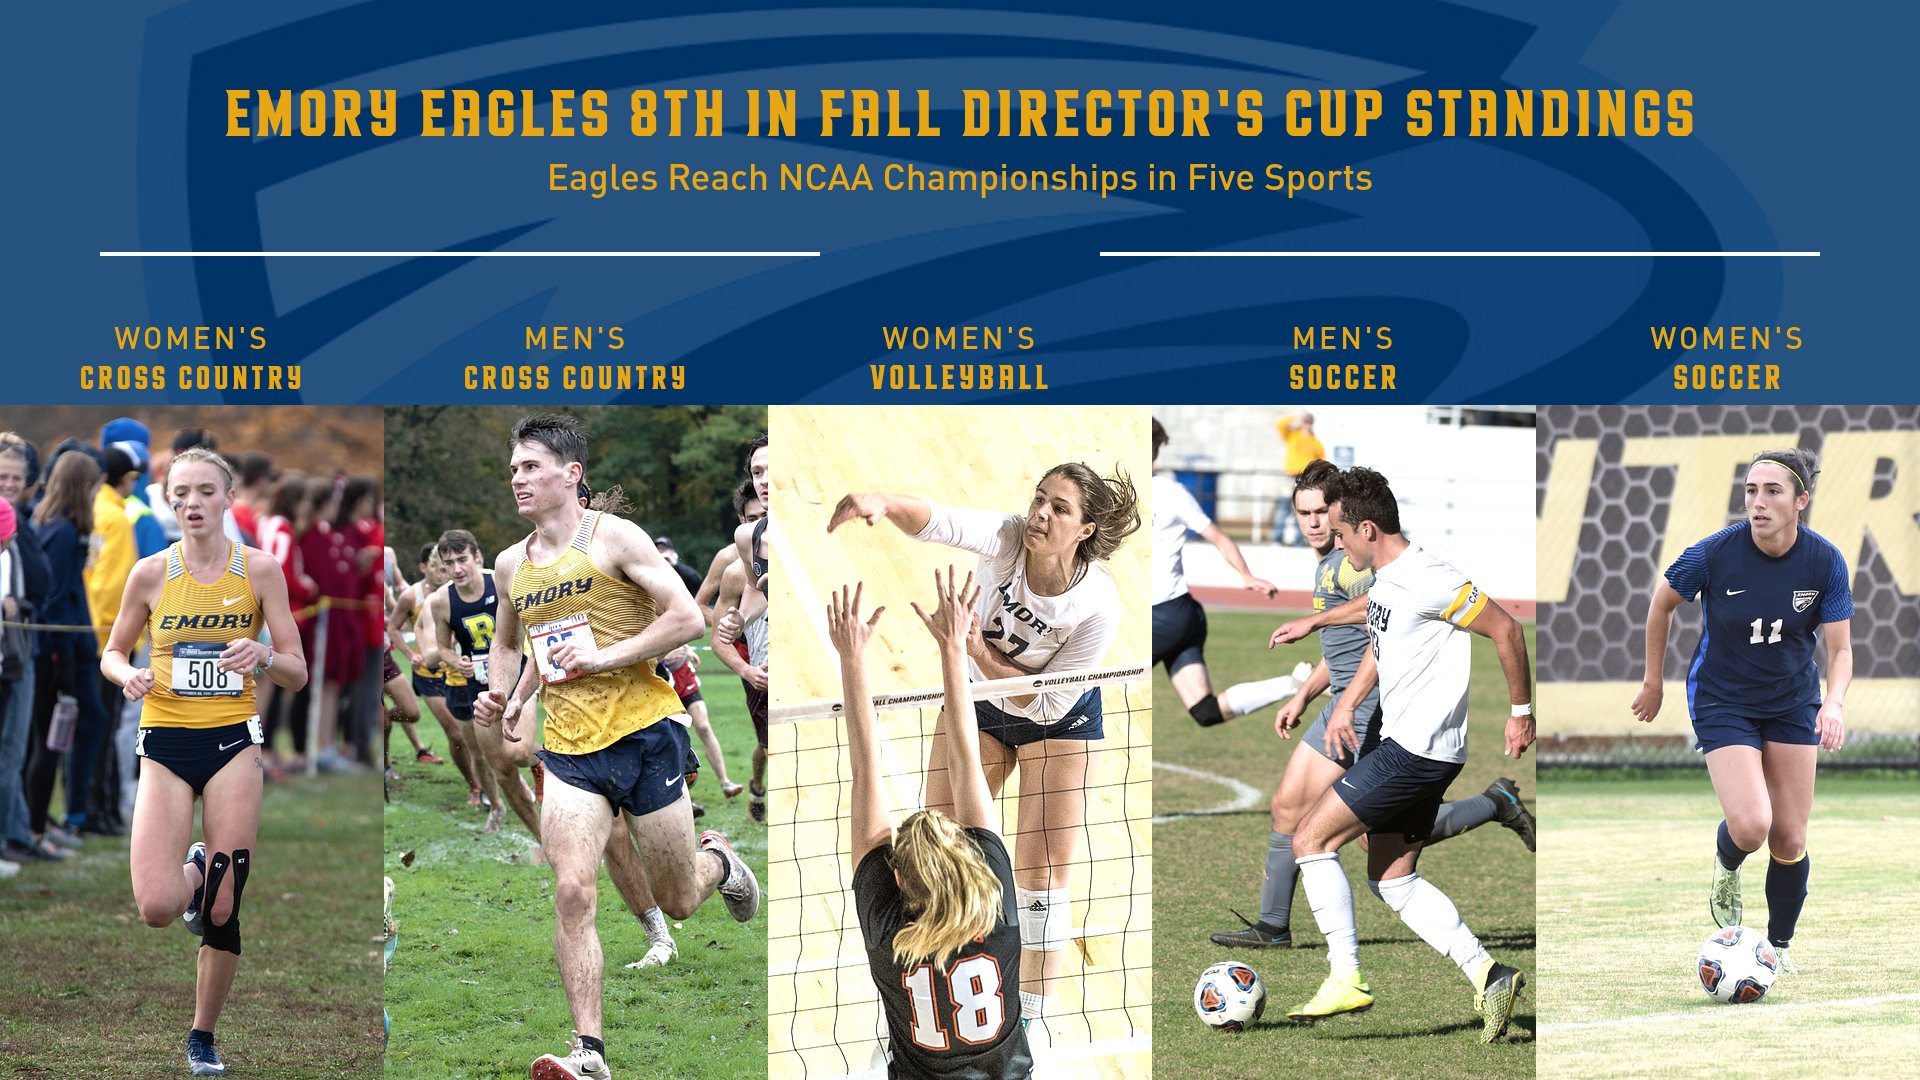 Eagles Finish 8th in Director's Cup Standings Following Fall Season